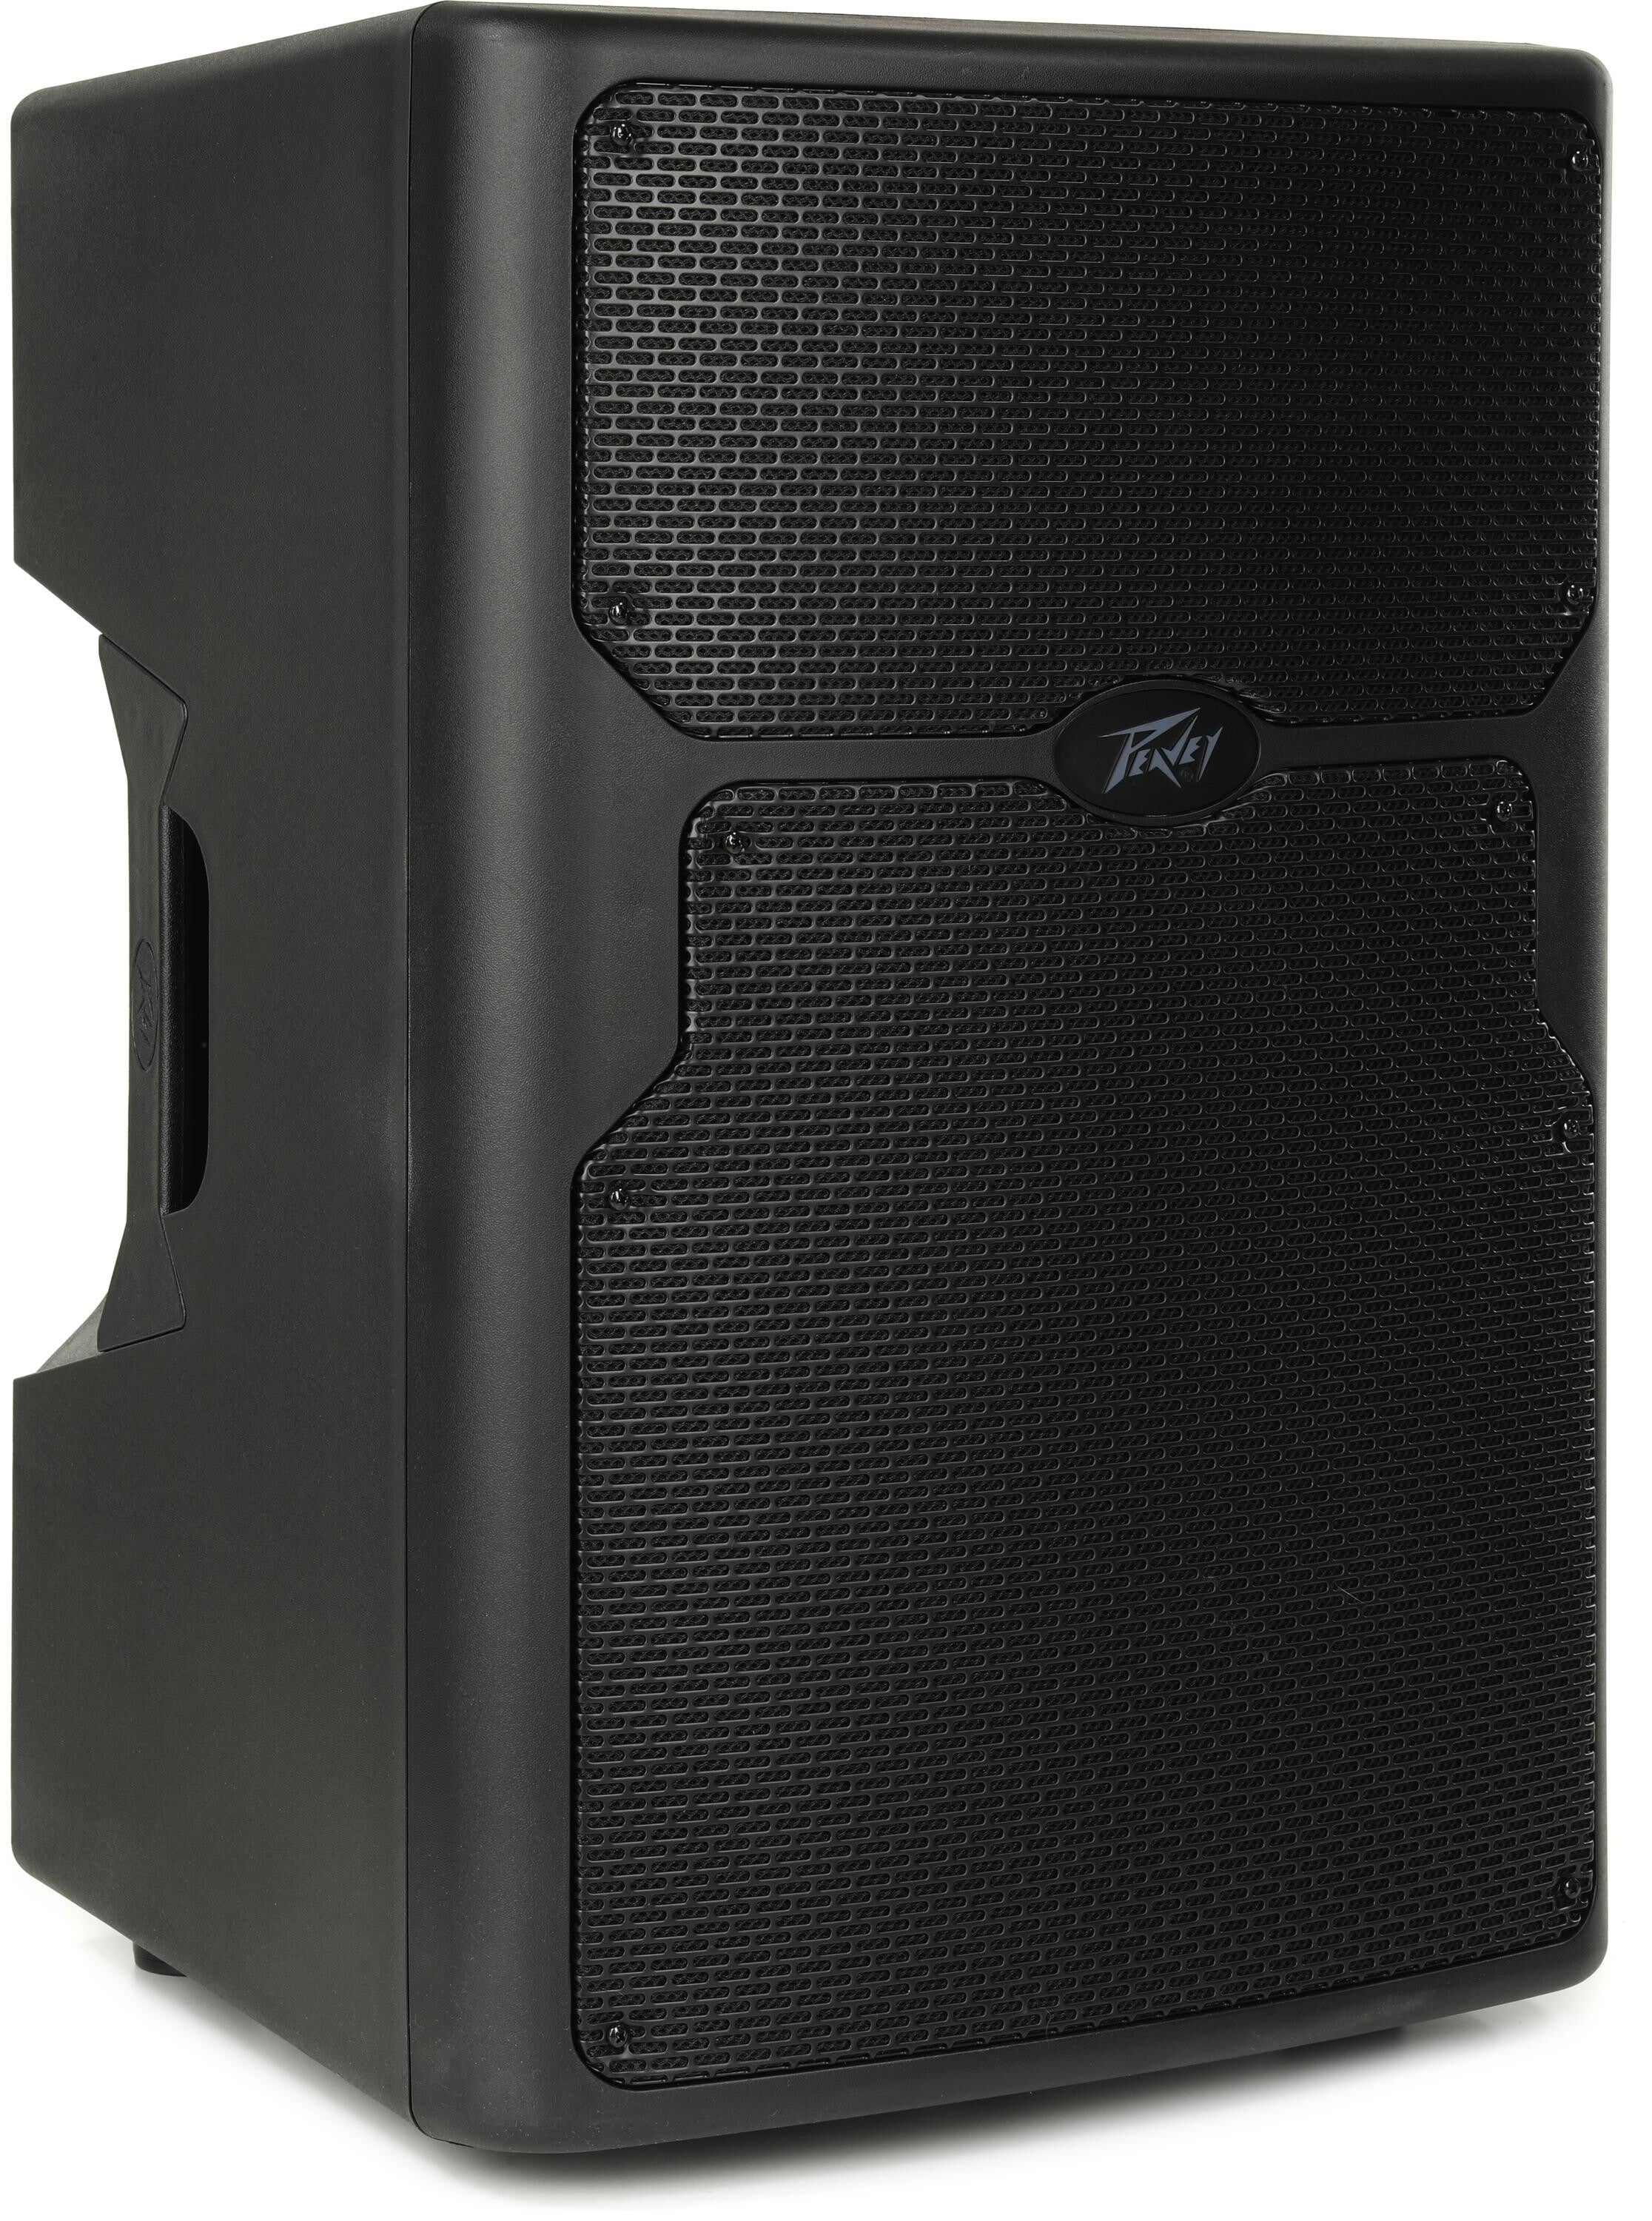 Peavey PVXp 12 inch Bluetooth Powered Speaker | Sweetwater